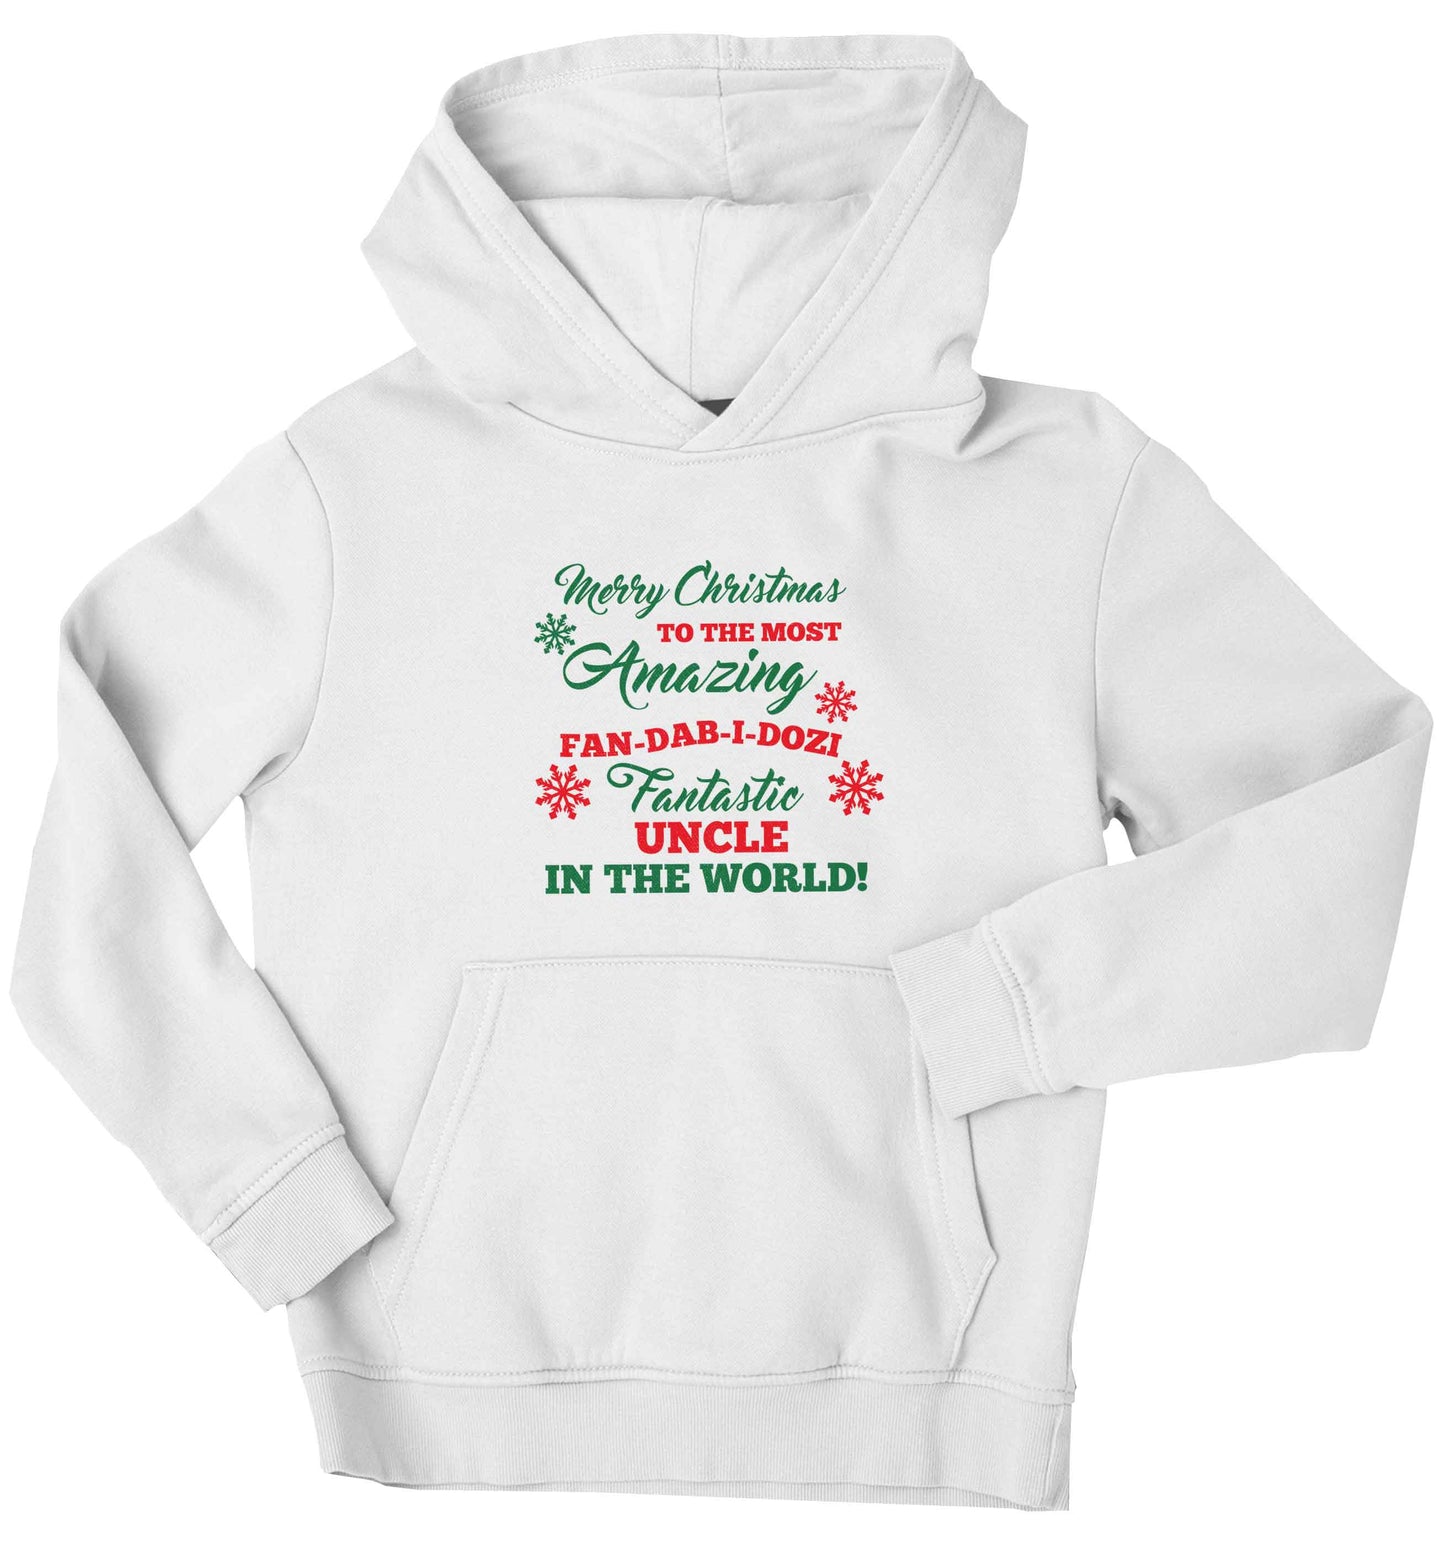 Merry Christmas to the most amazing fan-dab-i-dozi fantasic Uncle in the world children's white hoodie 12-13 Years